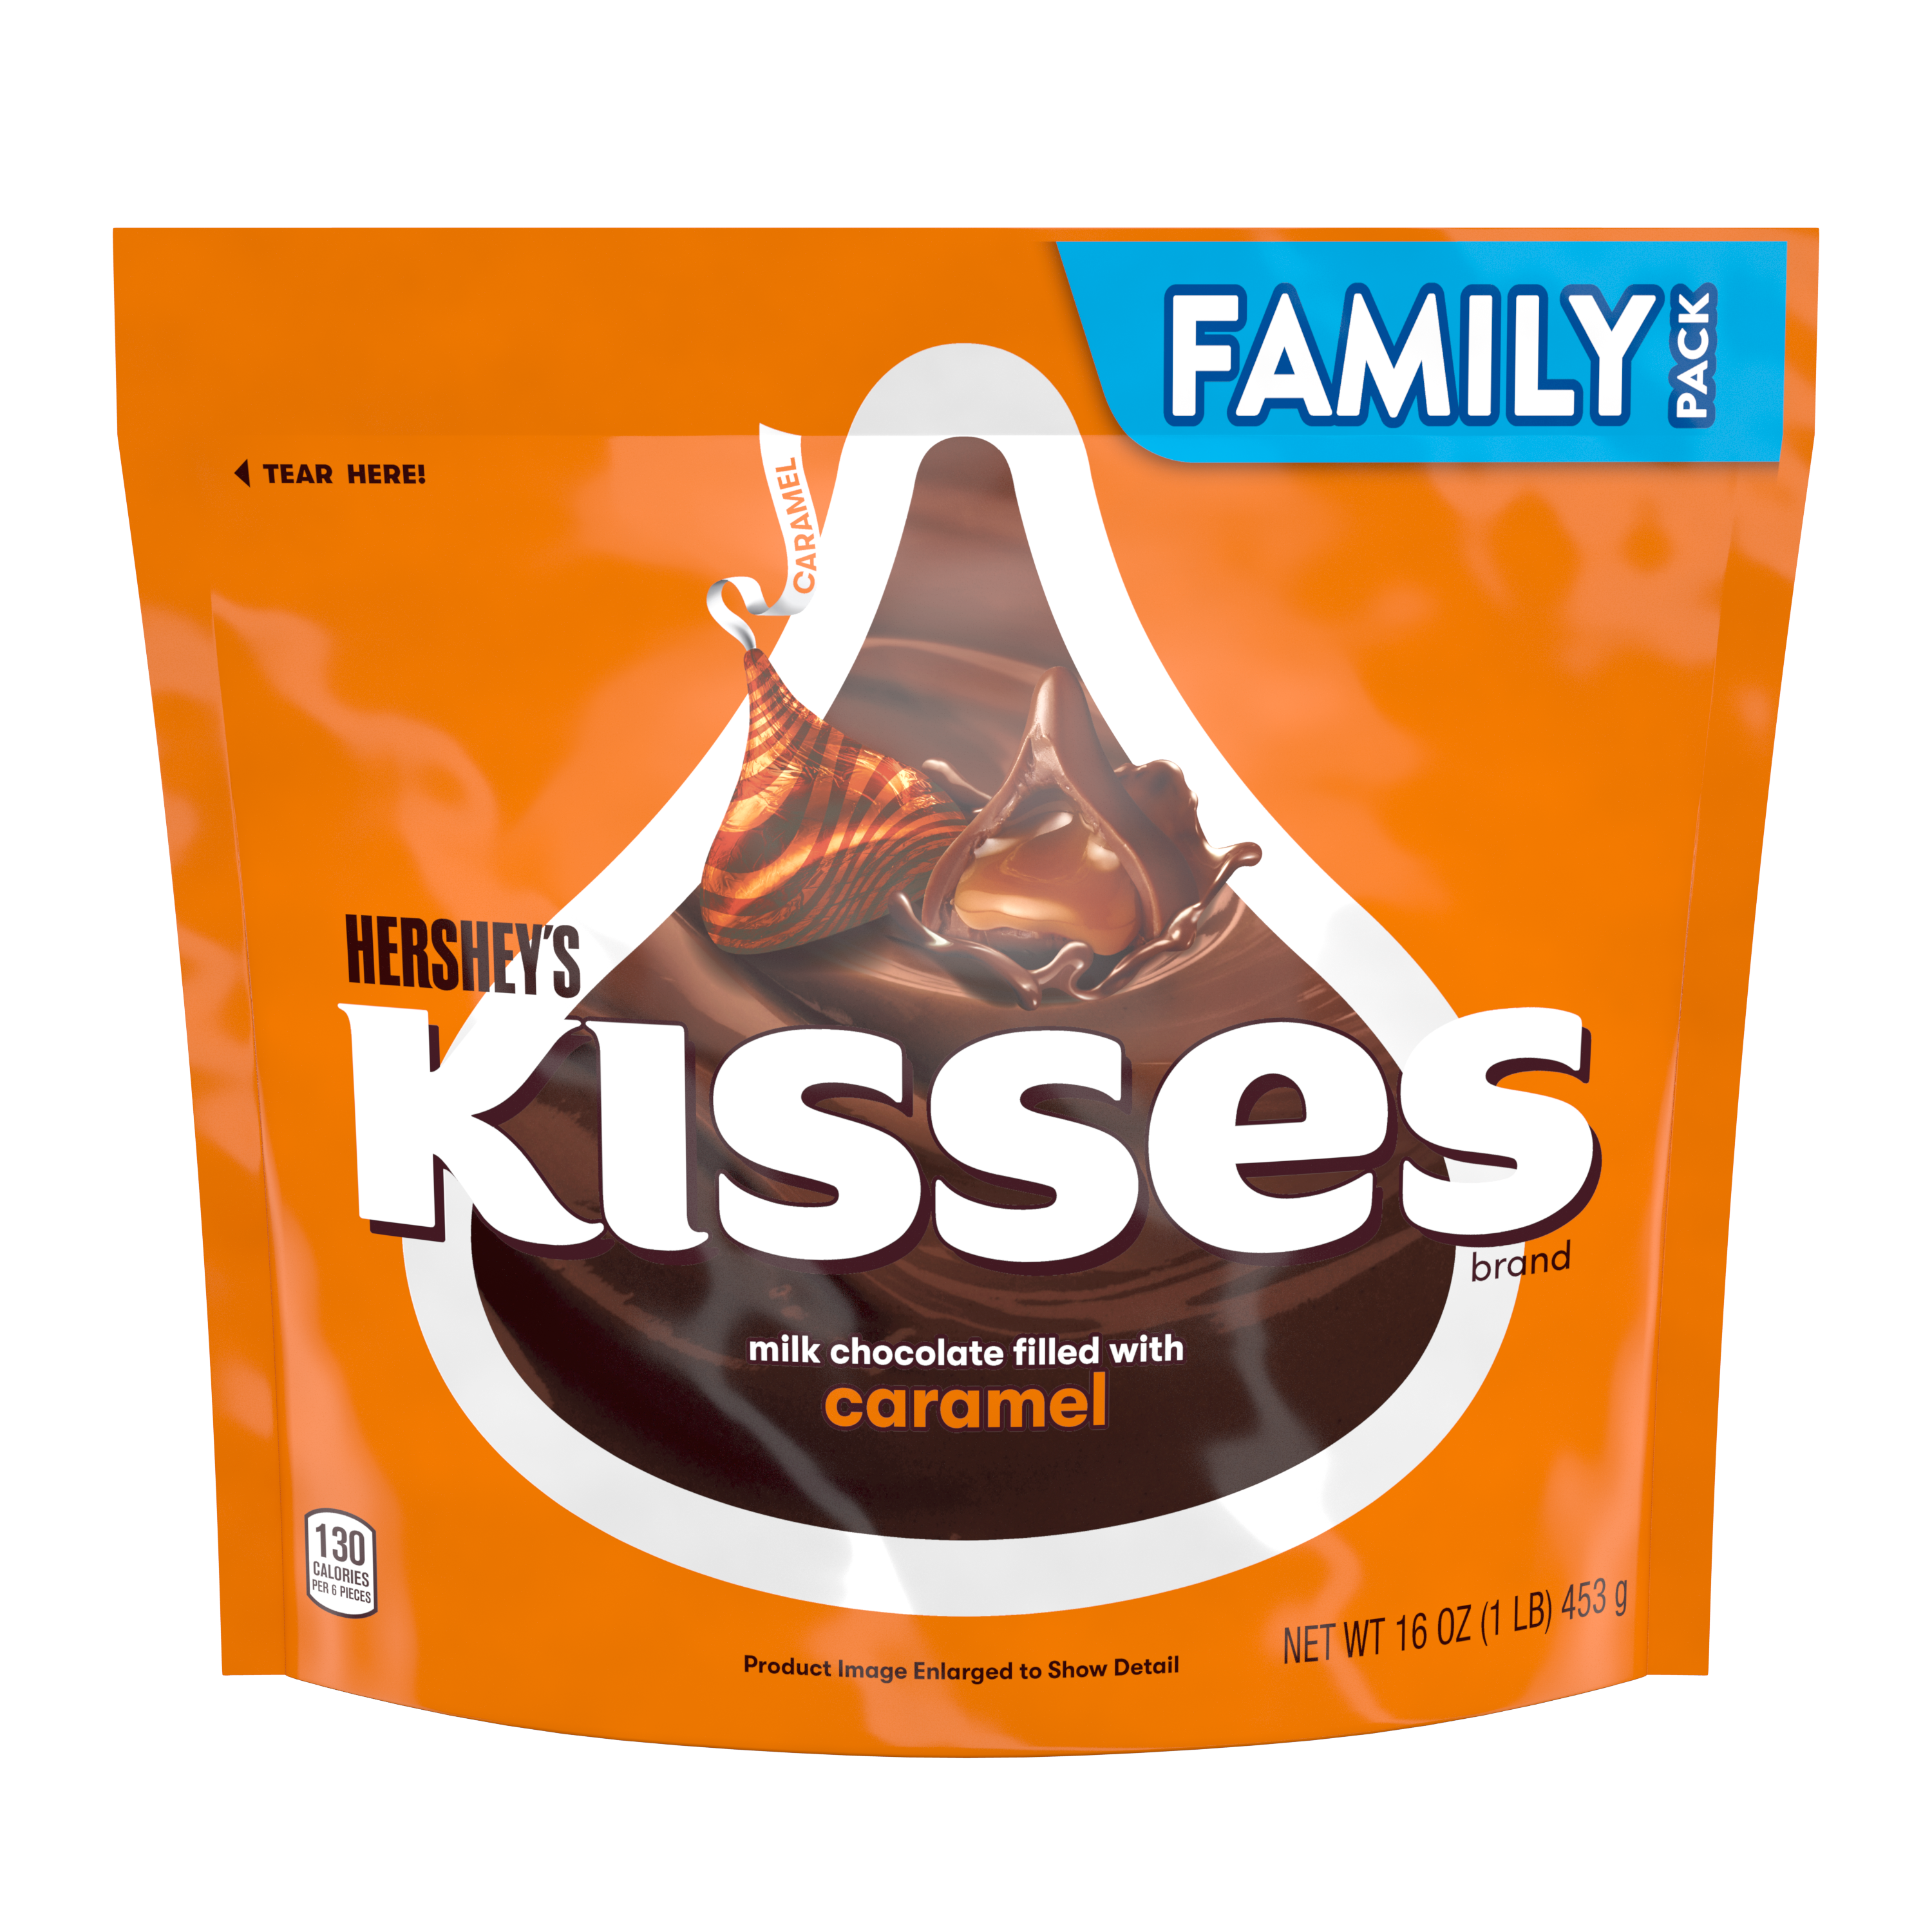 HERSHEY'S KISSES Milk Chocolate Filled with Caramel Candy, 16 oz pack - Front of Package